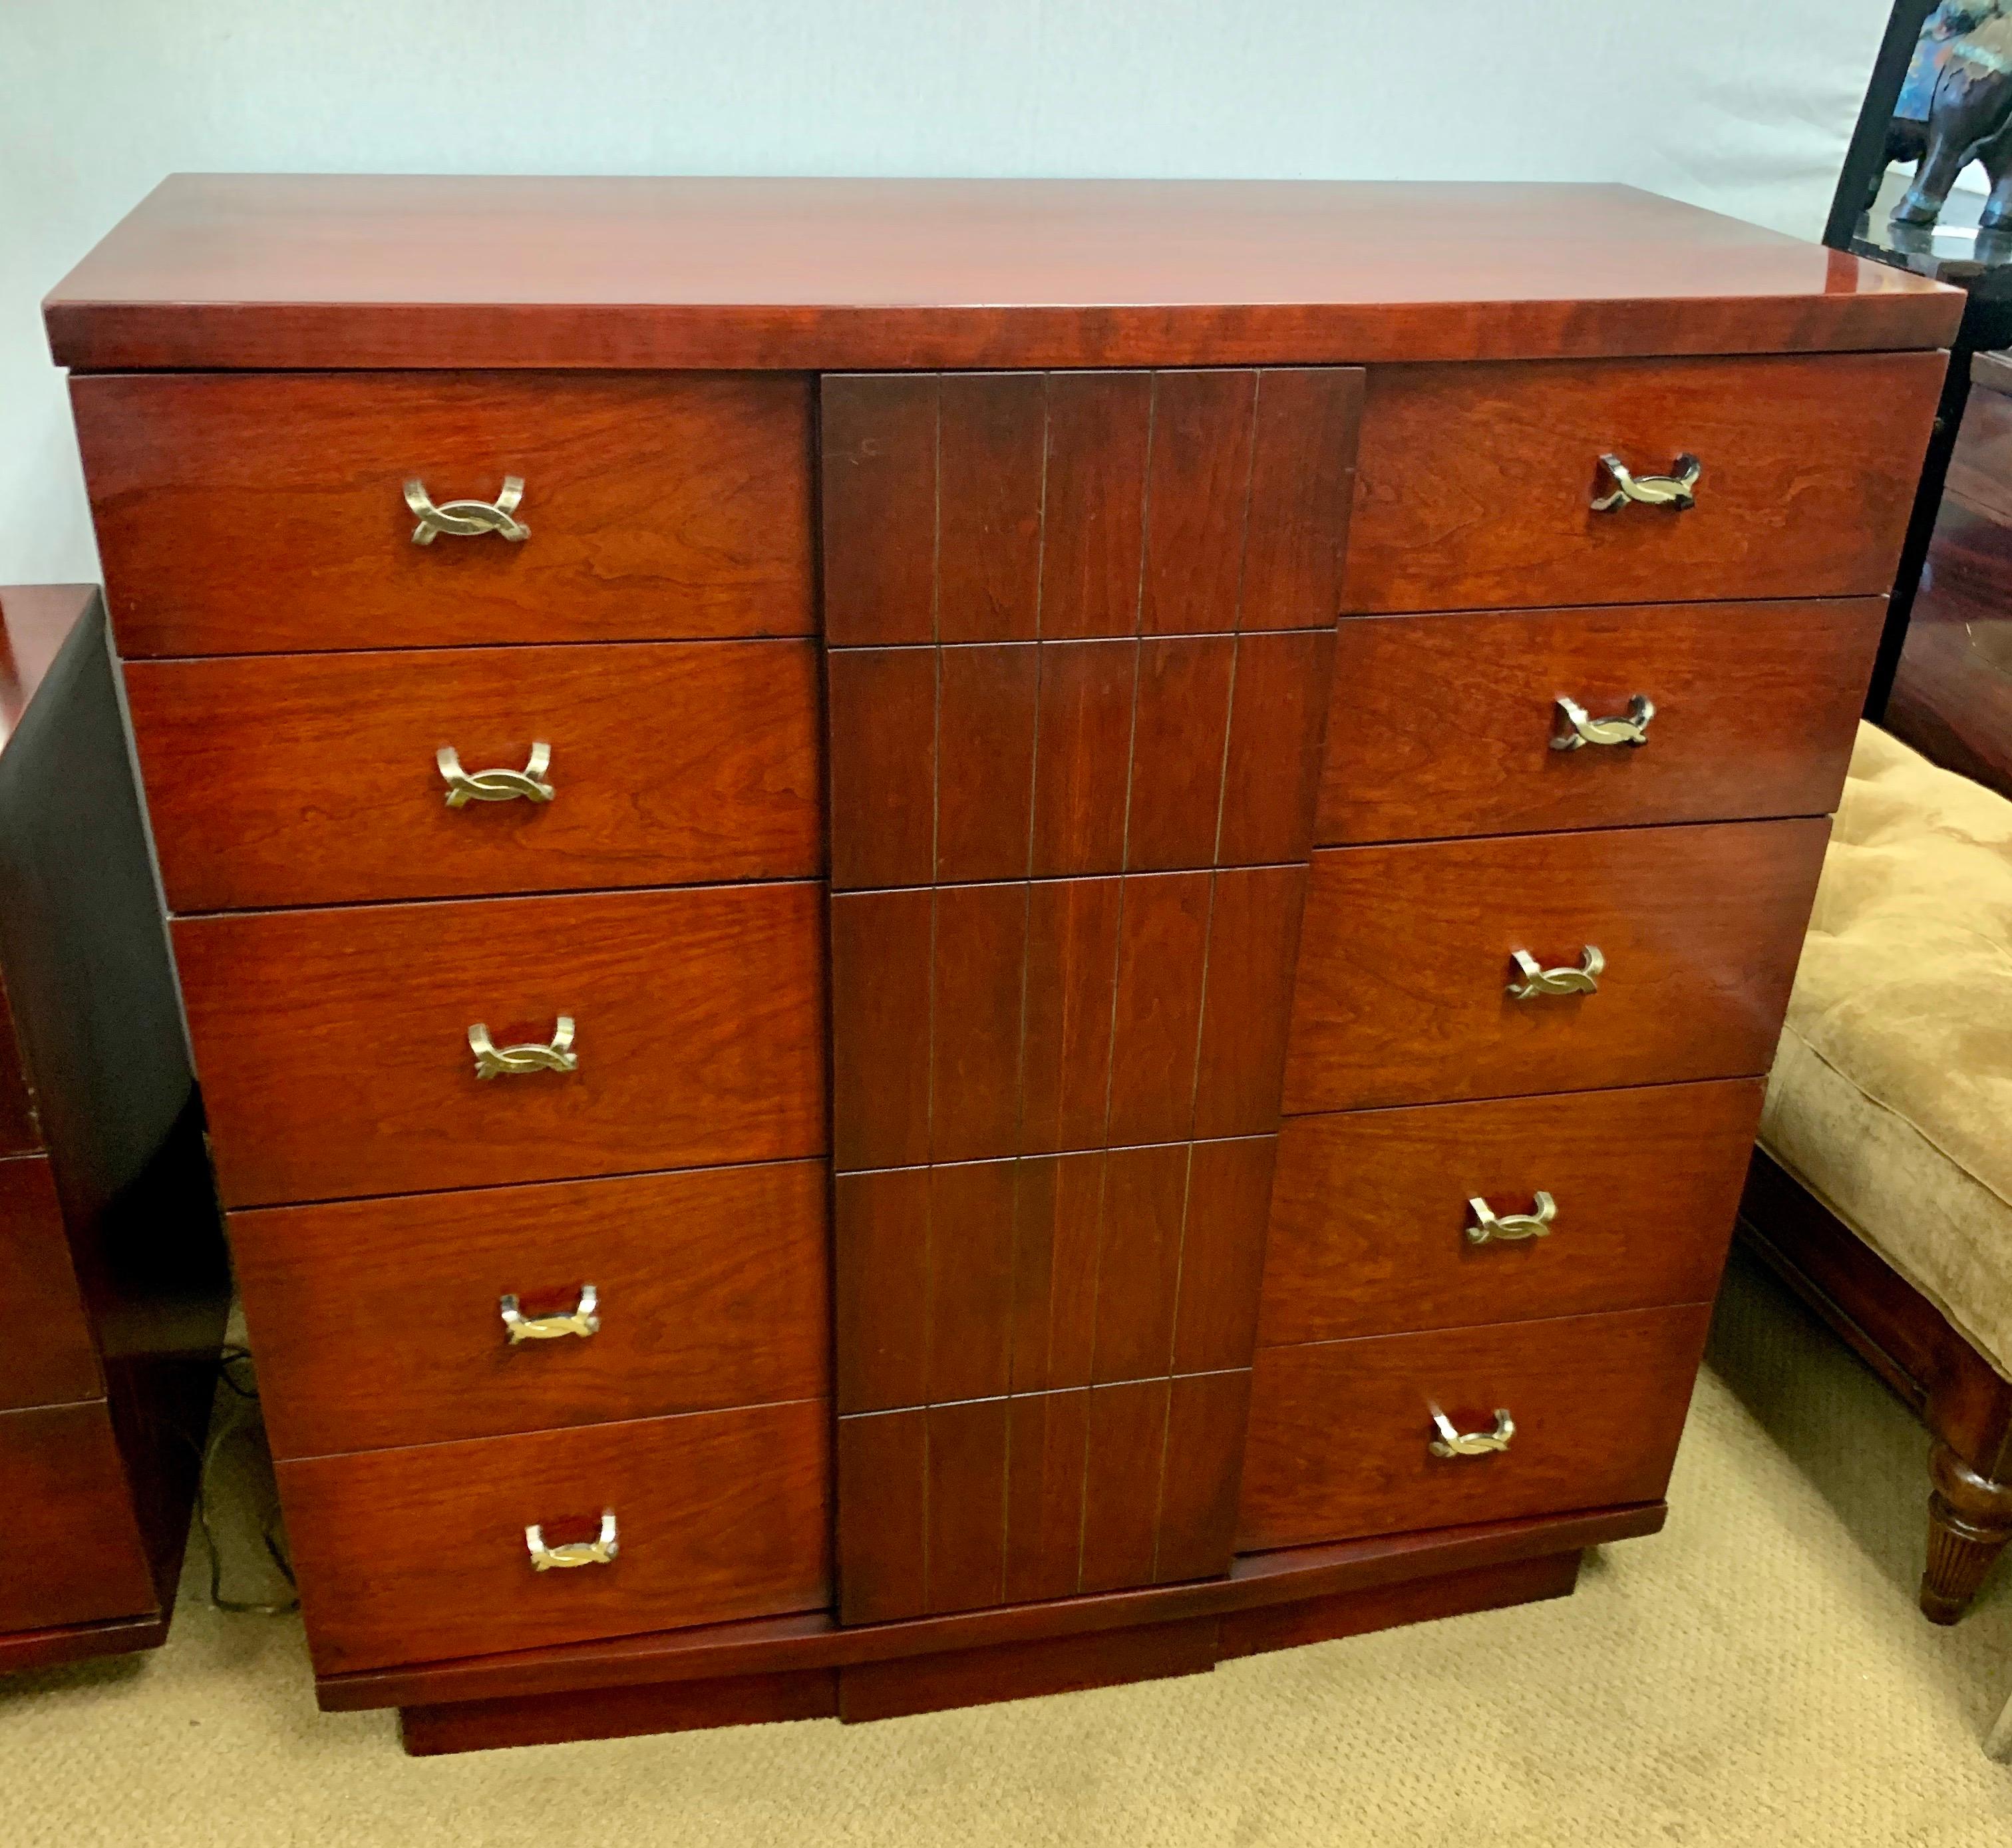 Iconic, signed midcentury Classic from Kent Coffey. This is part of the coveted titan line. Made in the USA and featuring nine drawers, all adorned with sought after X-pulls which are all original.